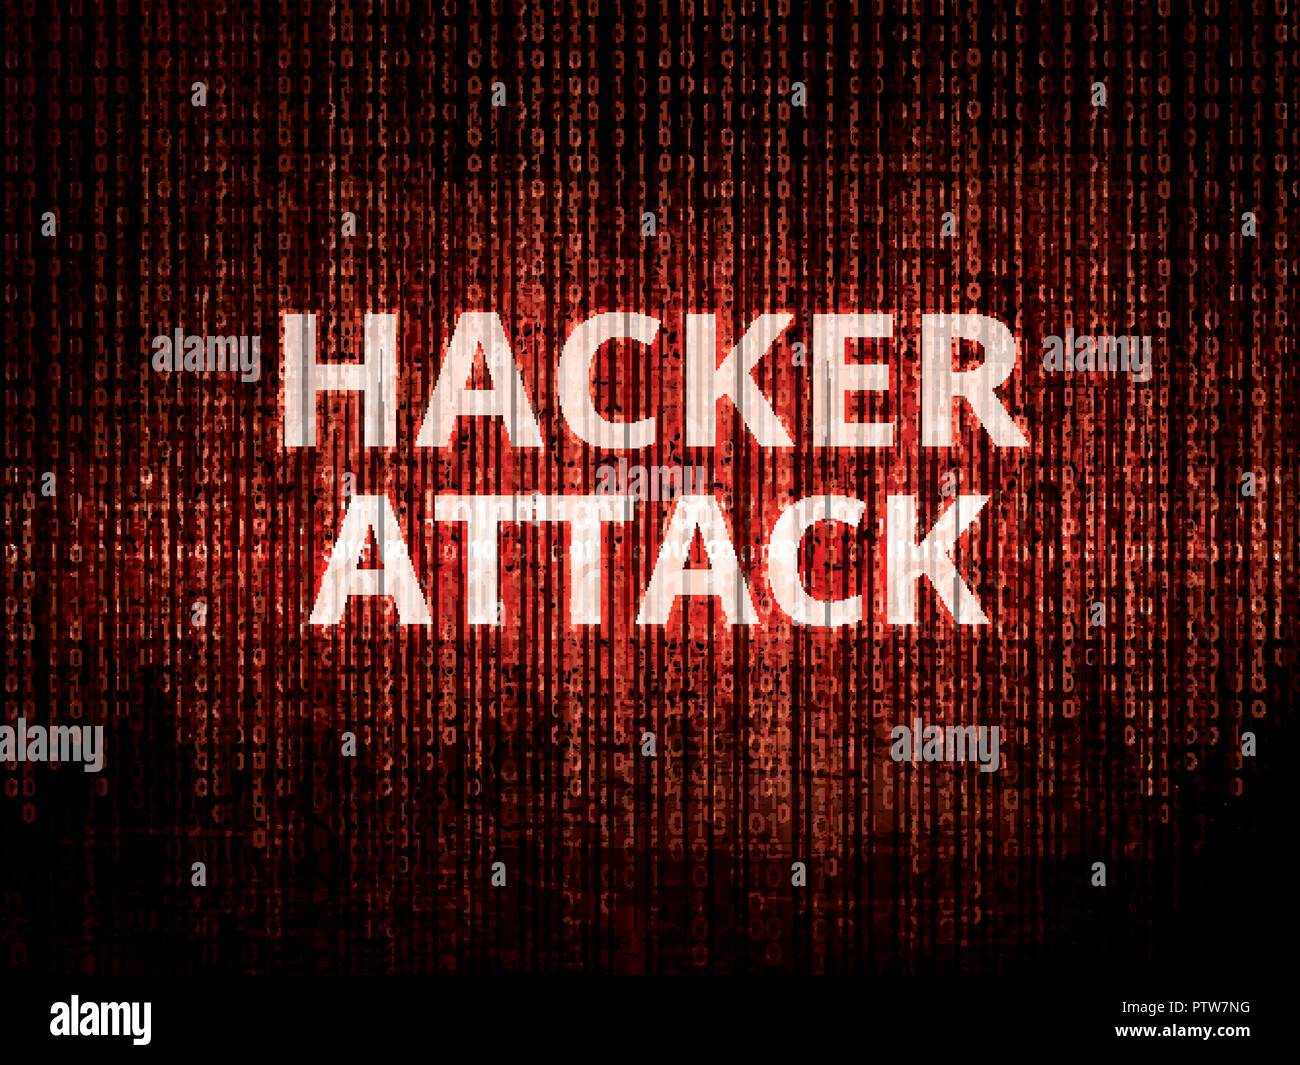 text hacker attack on background with binary encoding in red concept of invasion of privacy hacker attack computer attack by virus ransomware ma PTW7NG